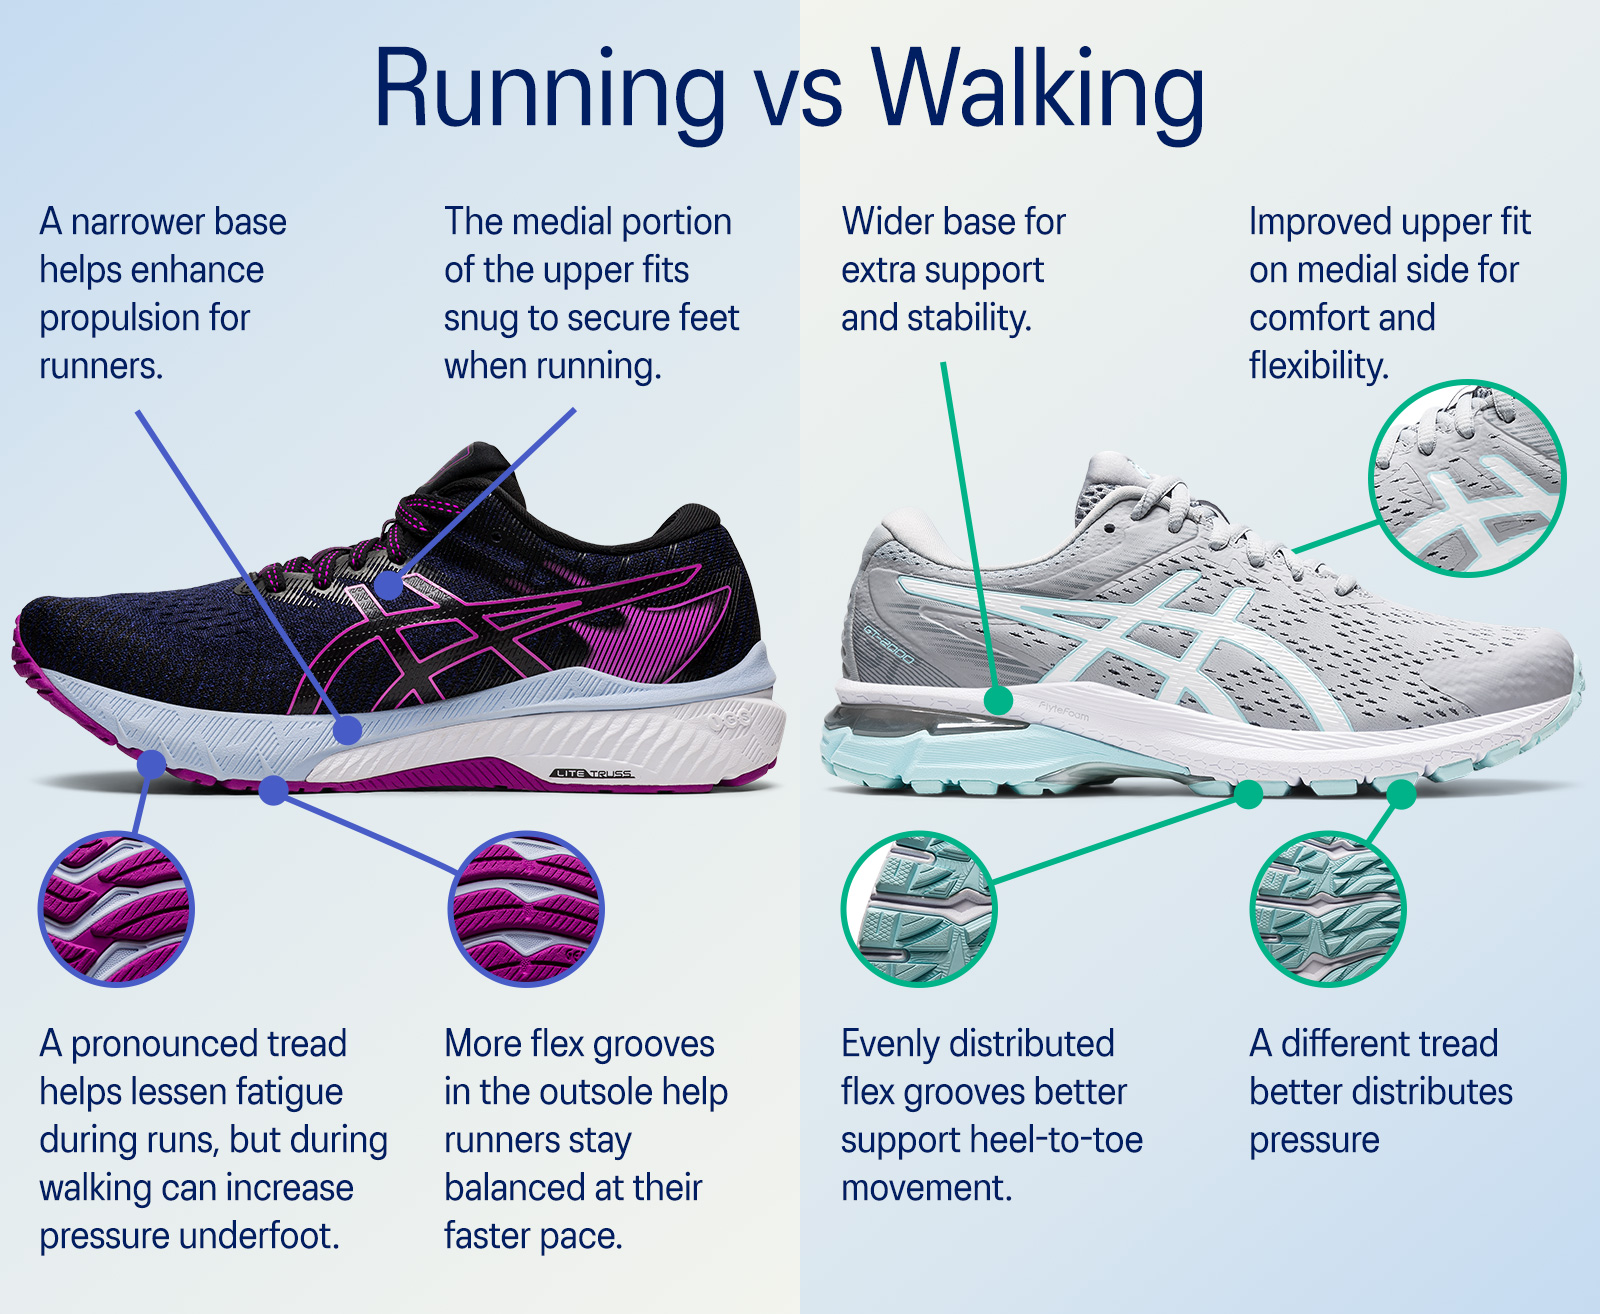 Do All Asics Shoes Fit the Same?